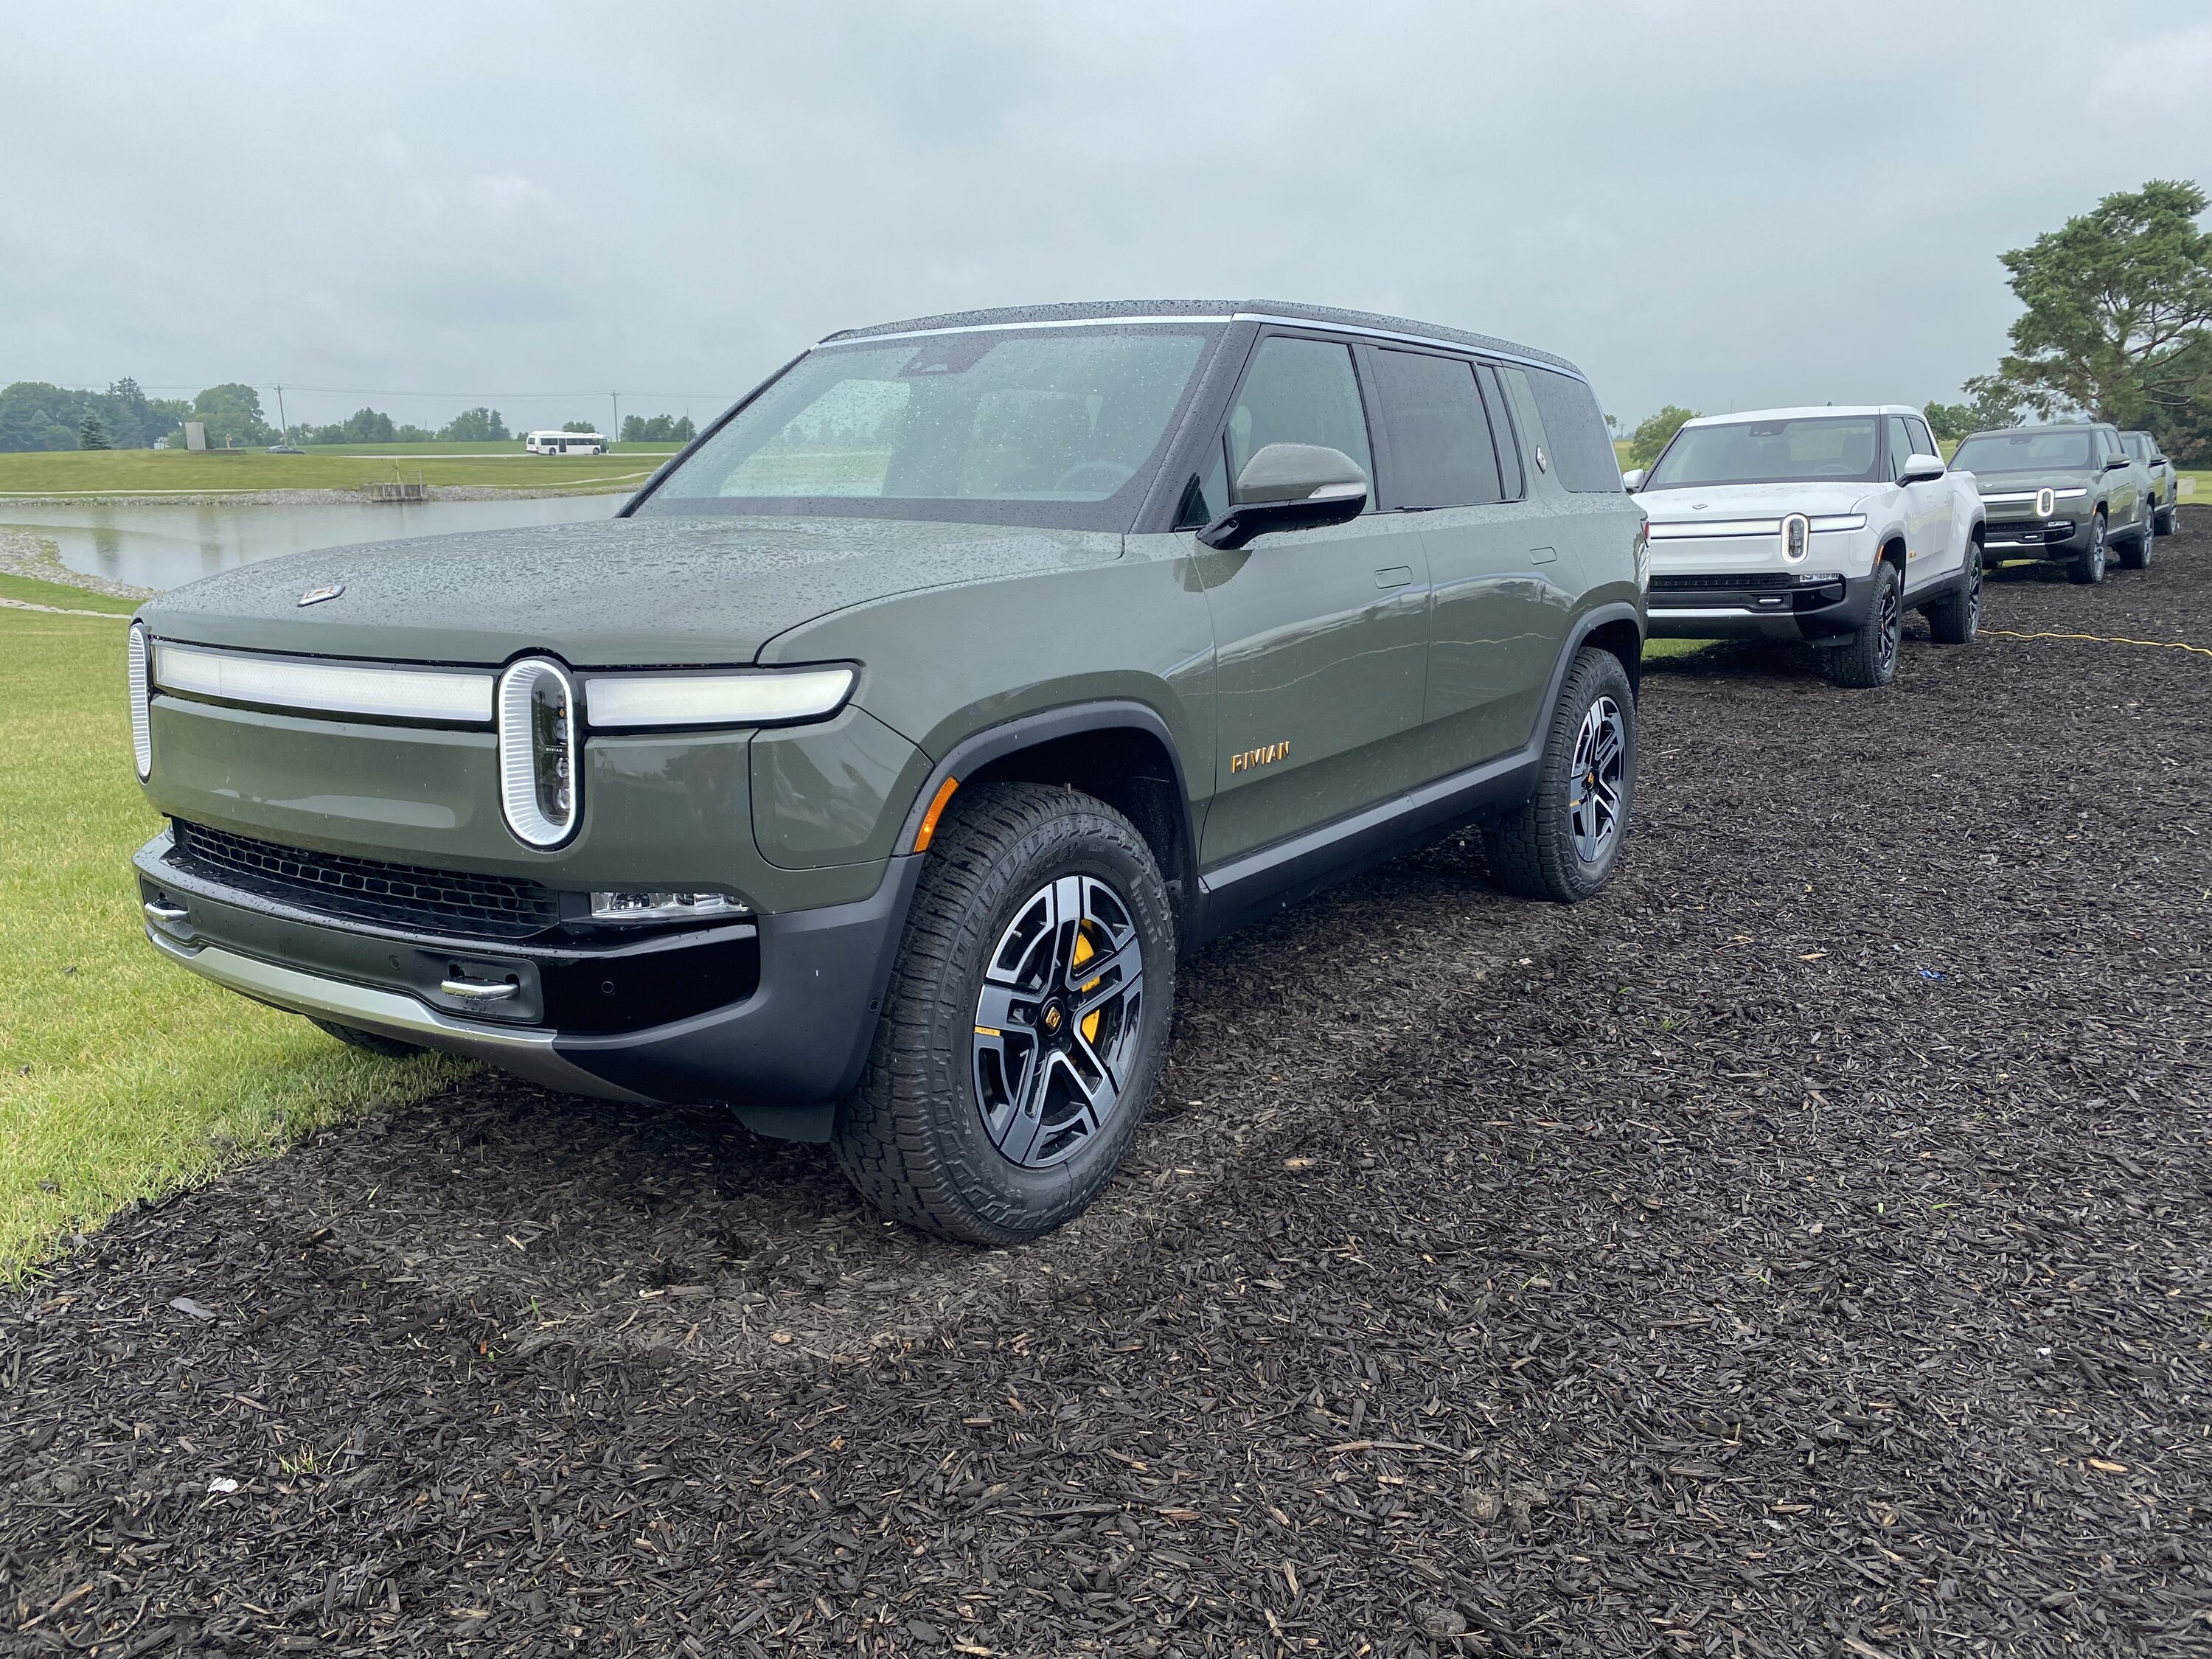 Rivian R1T R1S R1S Photos From Rivian Employee Family Day tempImageIhk2cJ